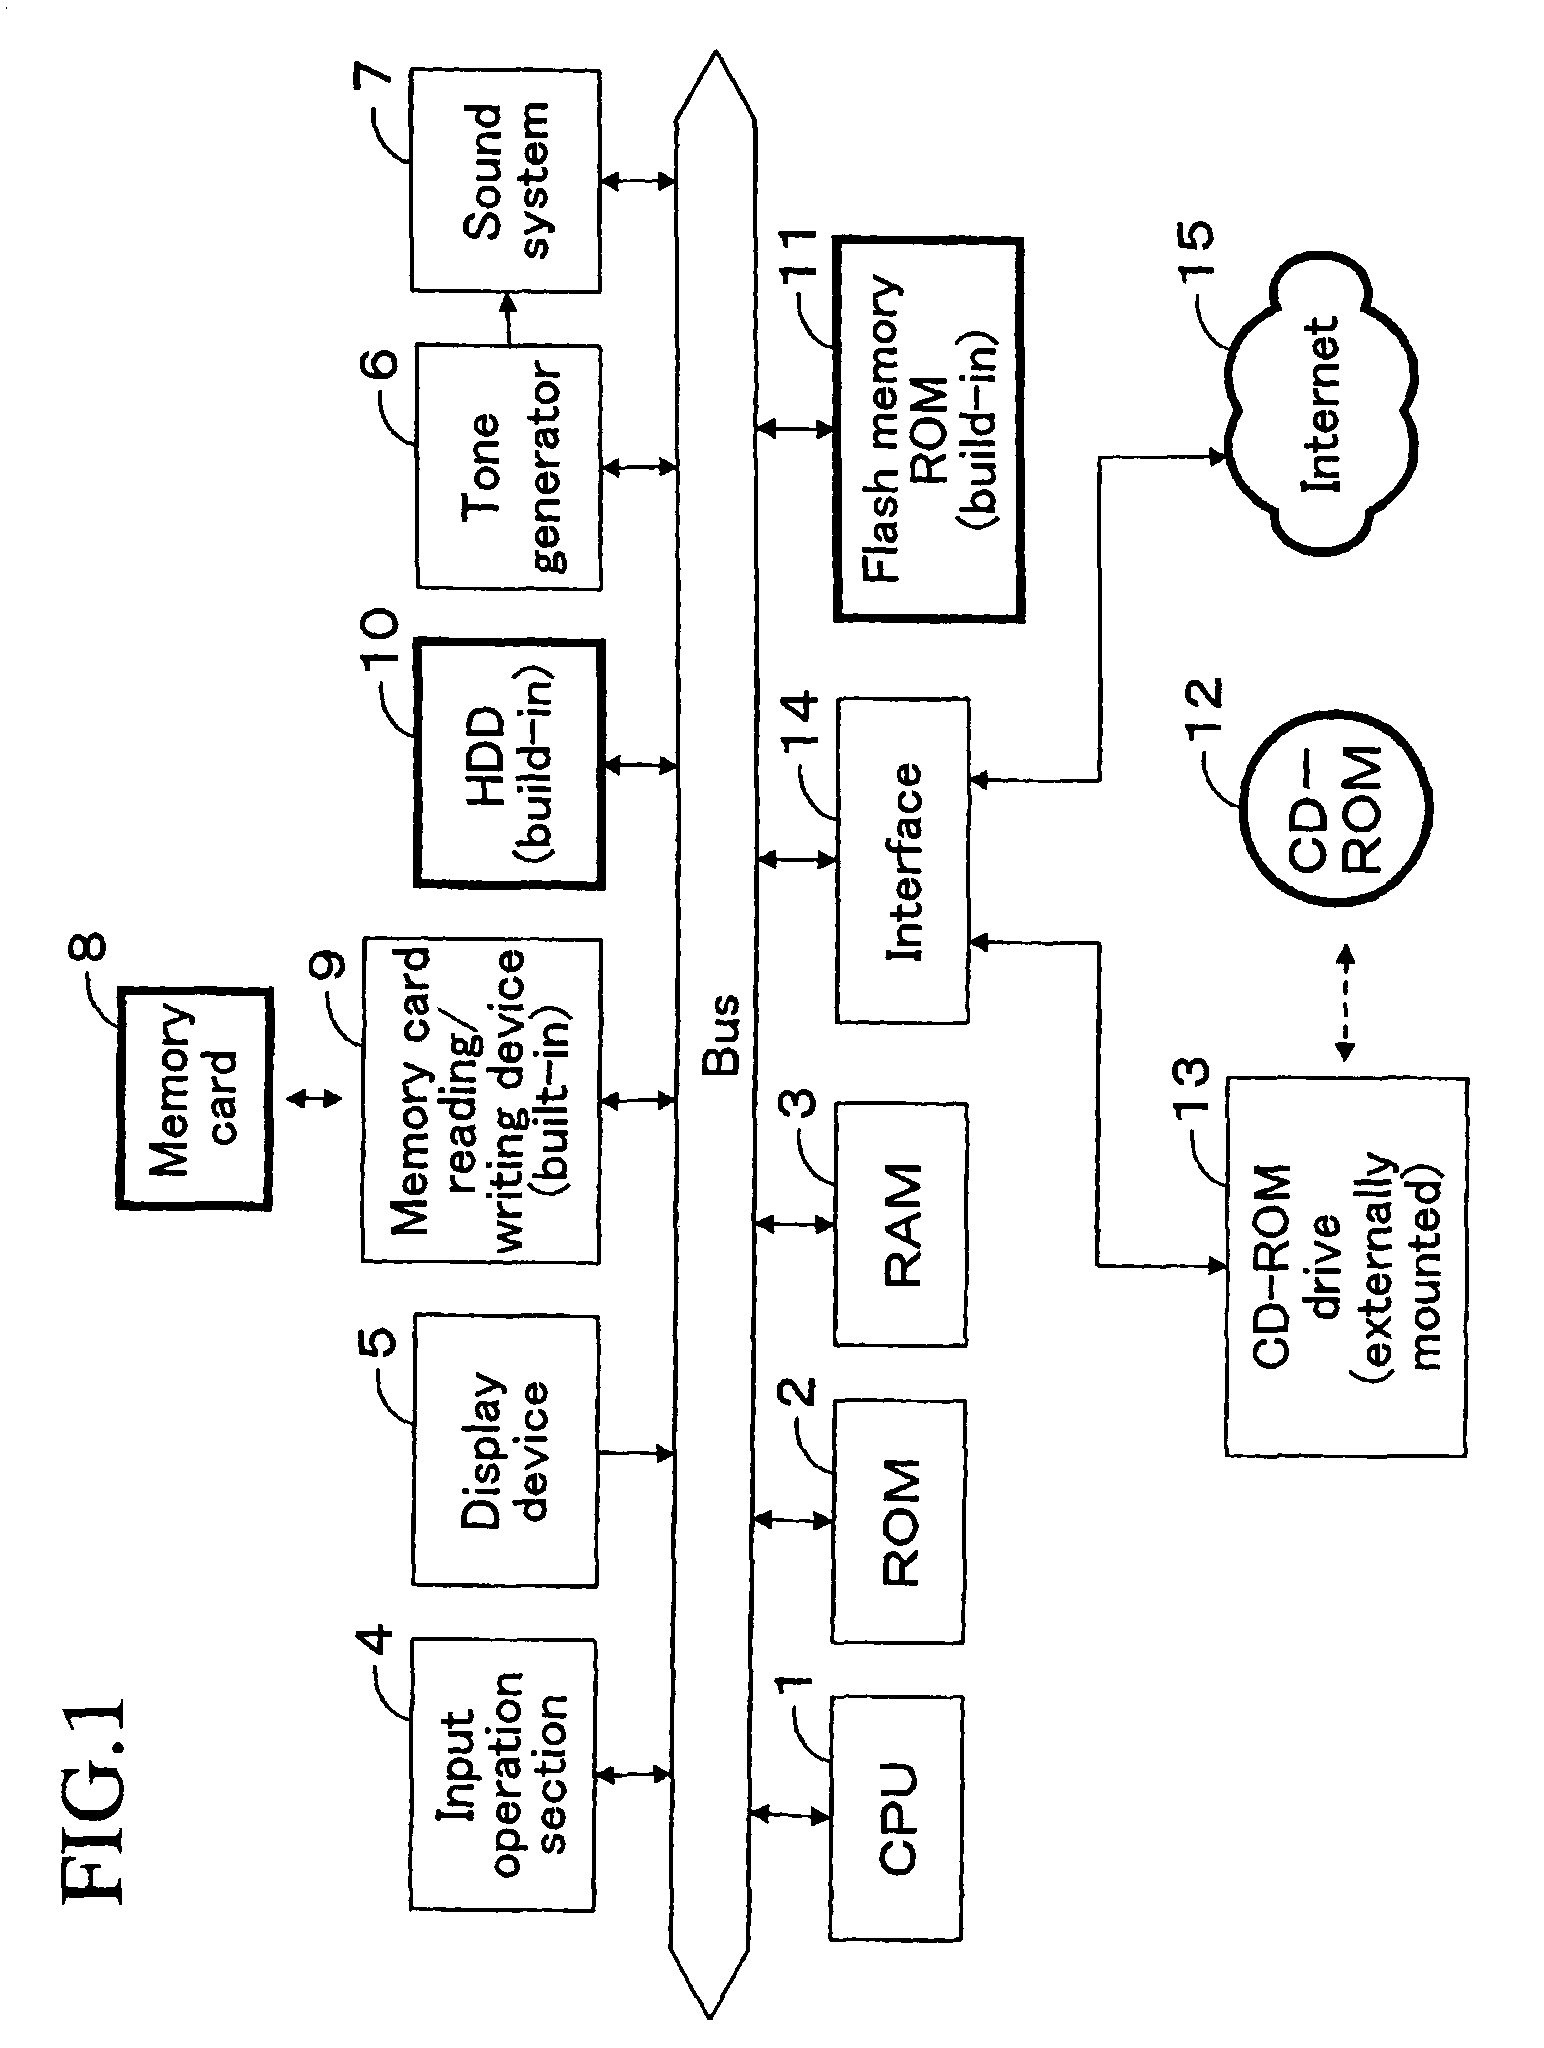 Electronic musical apparatus for recording and reproducing music content